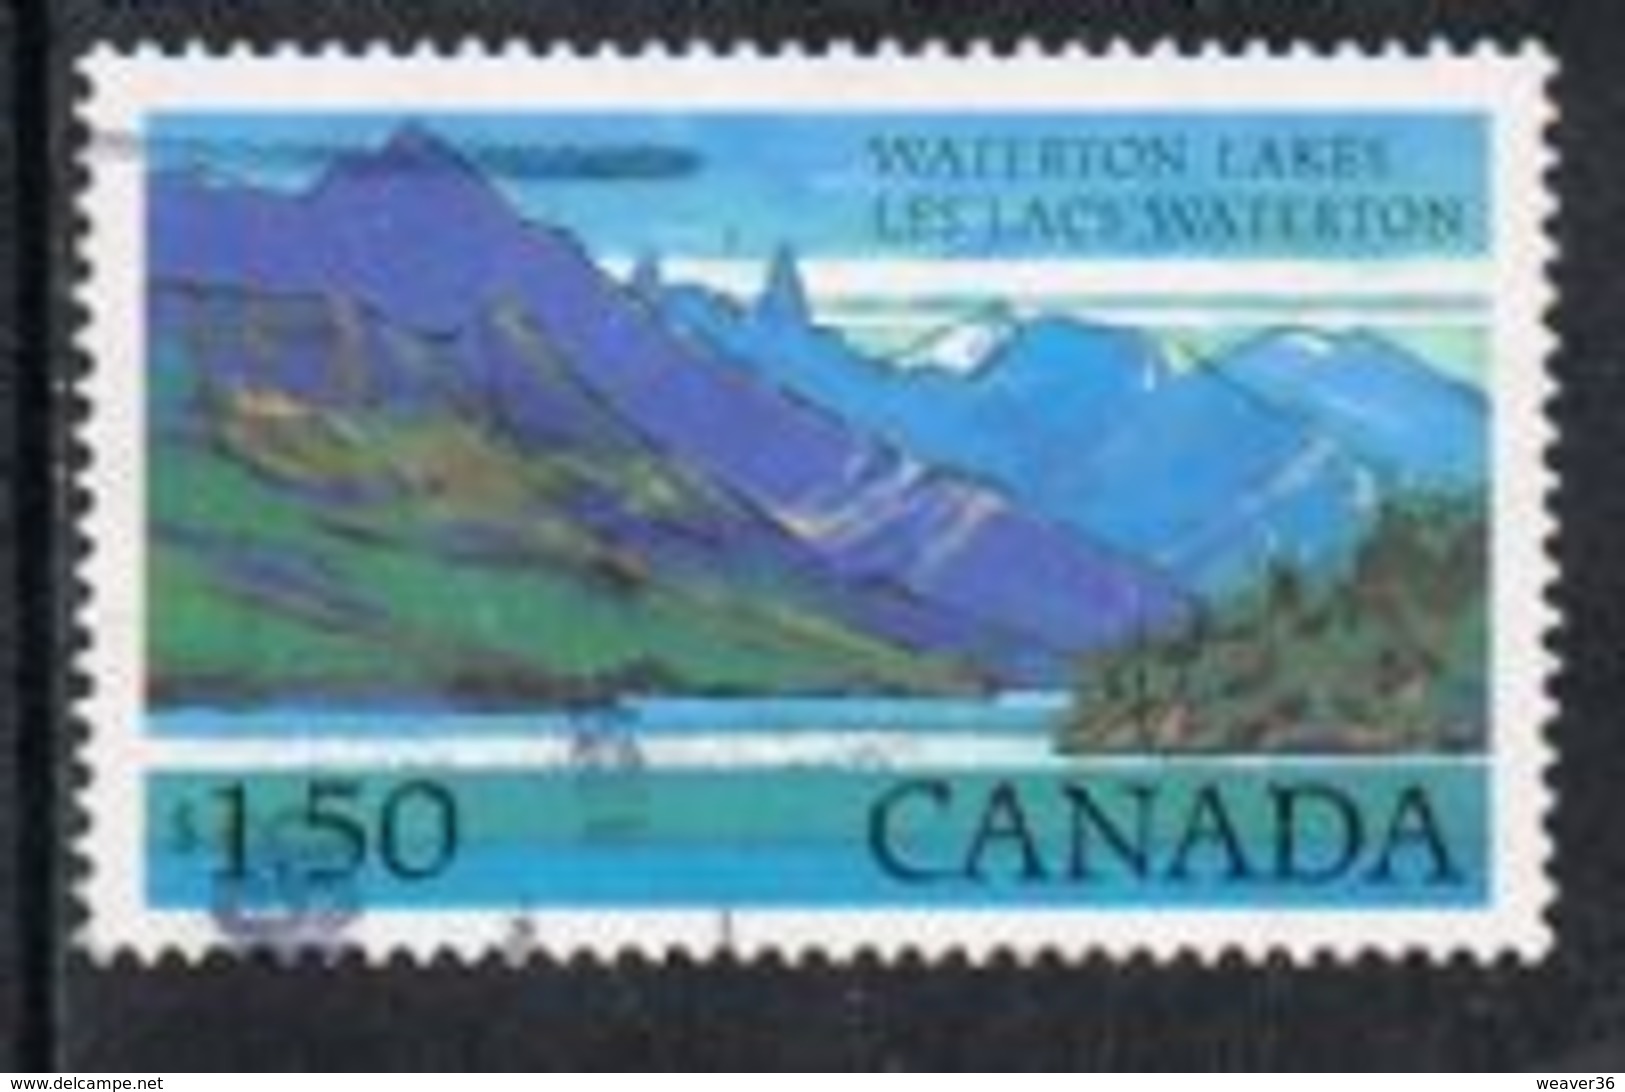 Canada SG884c 1982 Definitive $1.50 Good/fine Used [13/13474/4D] - Used Stamps